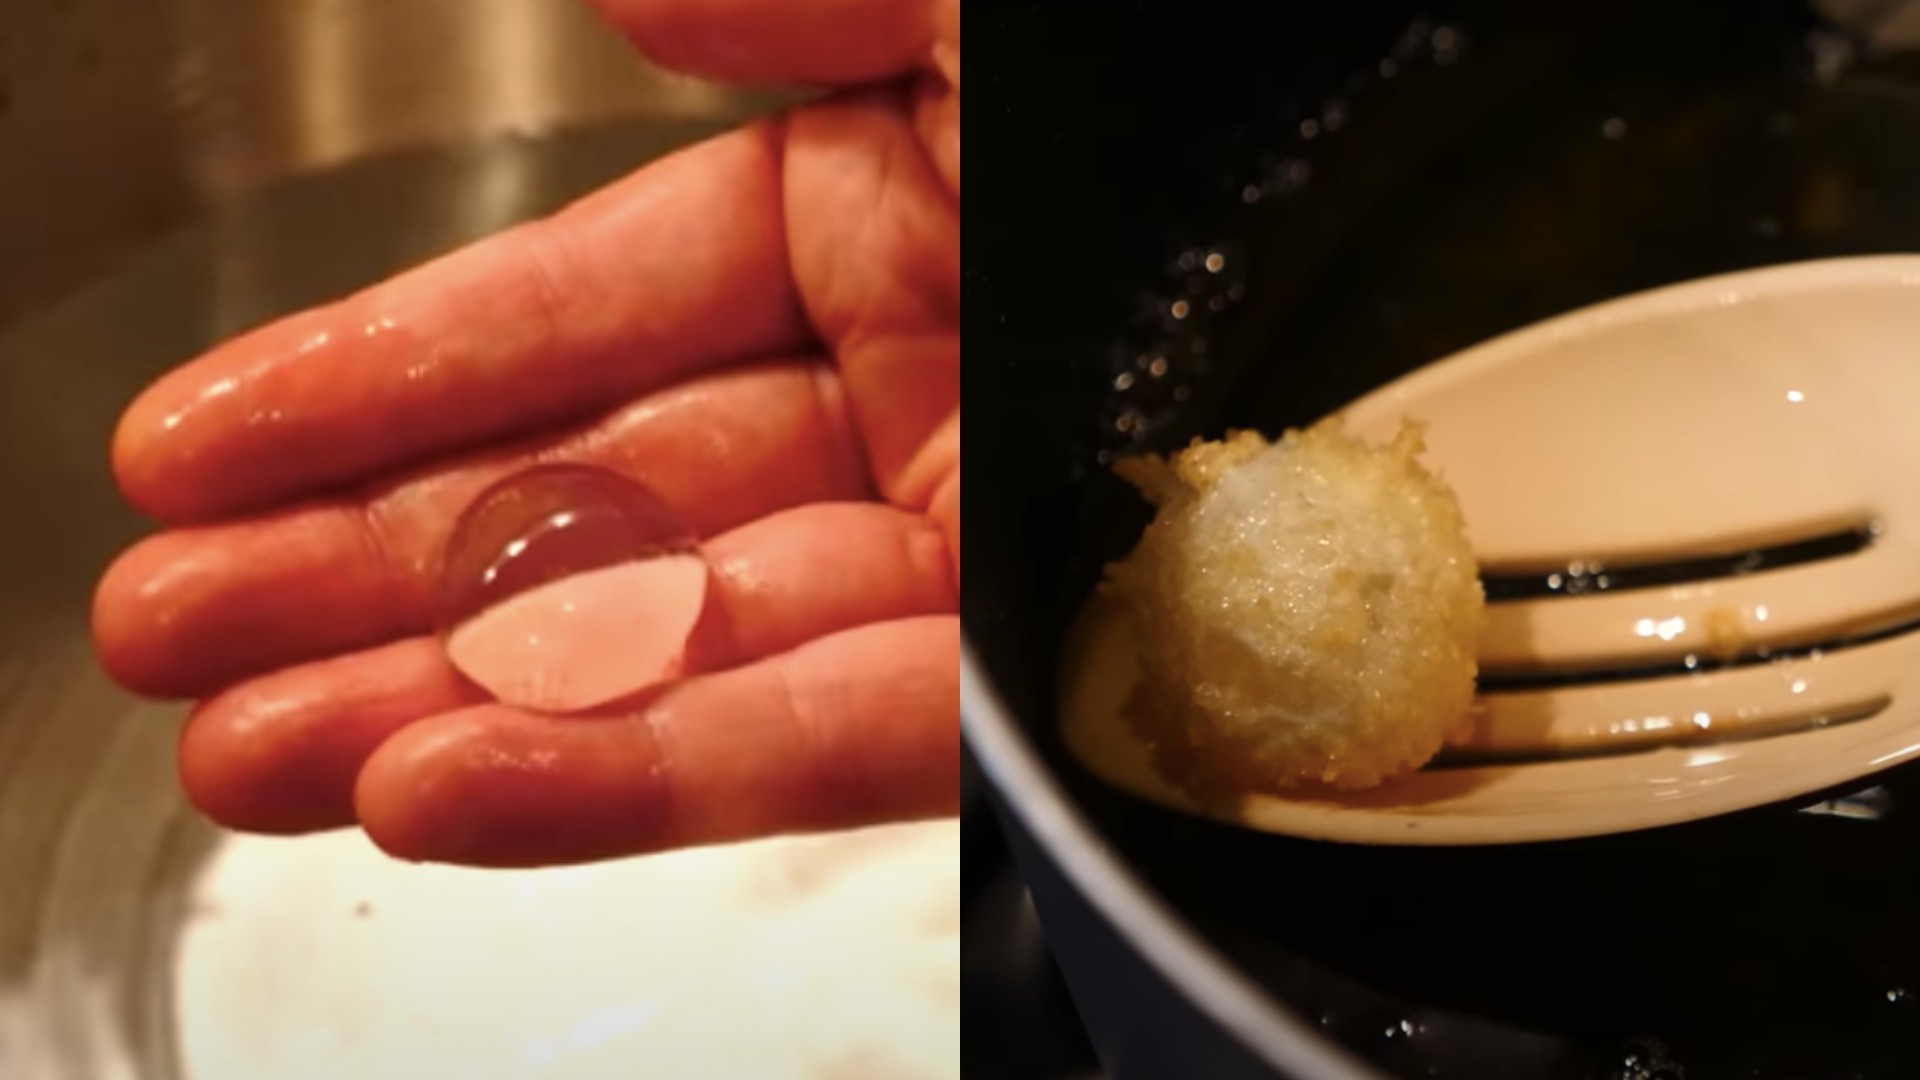 https://video-images.vice.com/articles/606431a26f2c22009306cf97/lede/1617179794681-we-asked-people-who-deep-fry-water-why.jpeg?crop=1xw:1xh;center,center